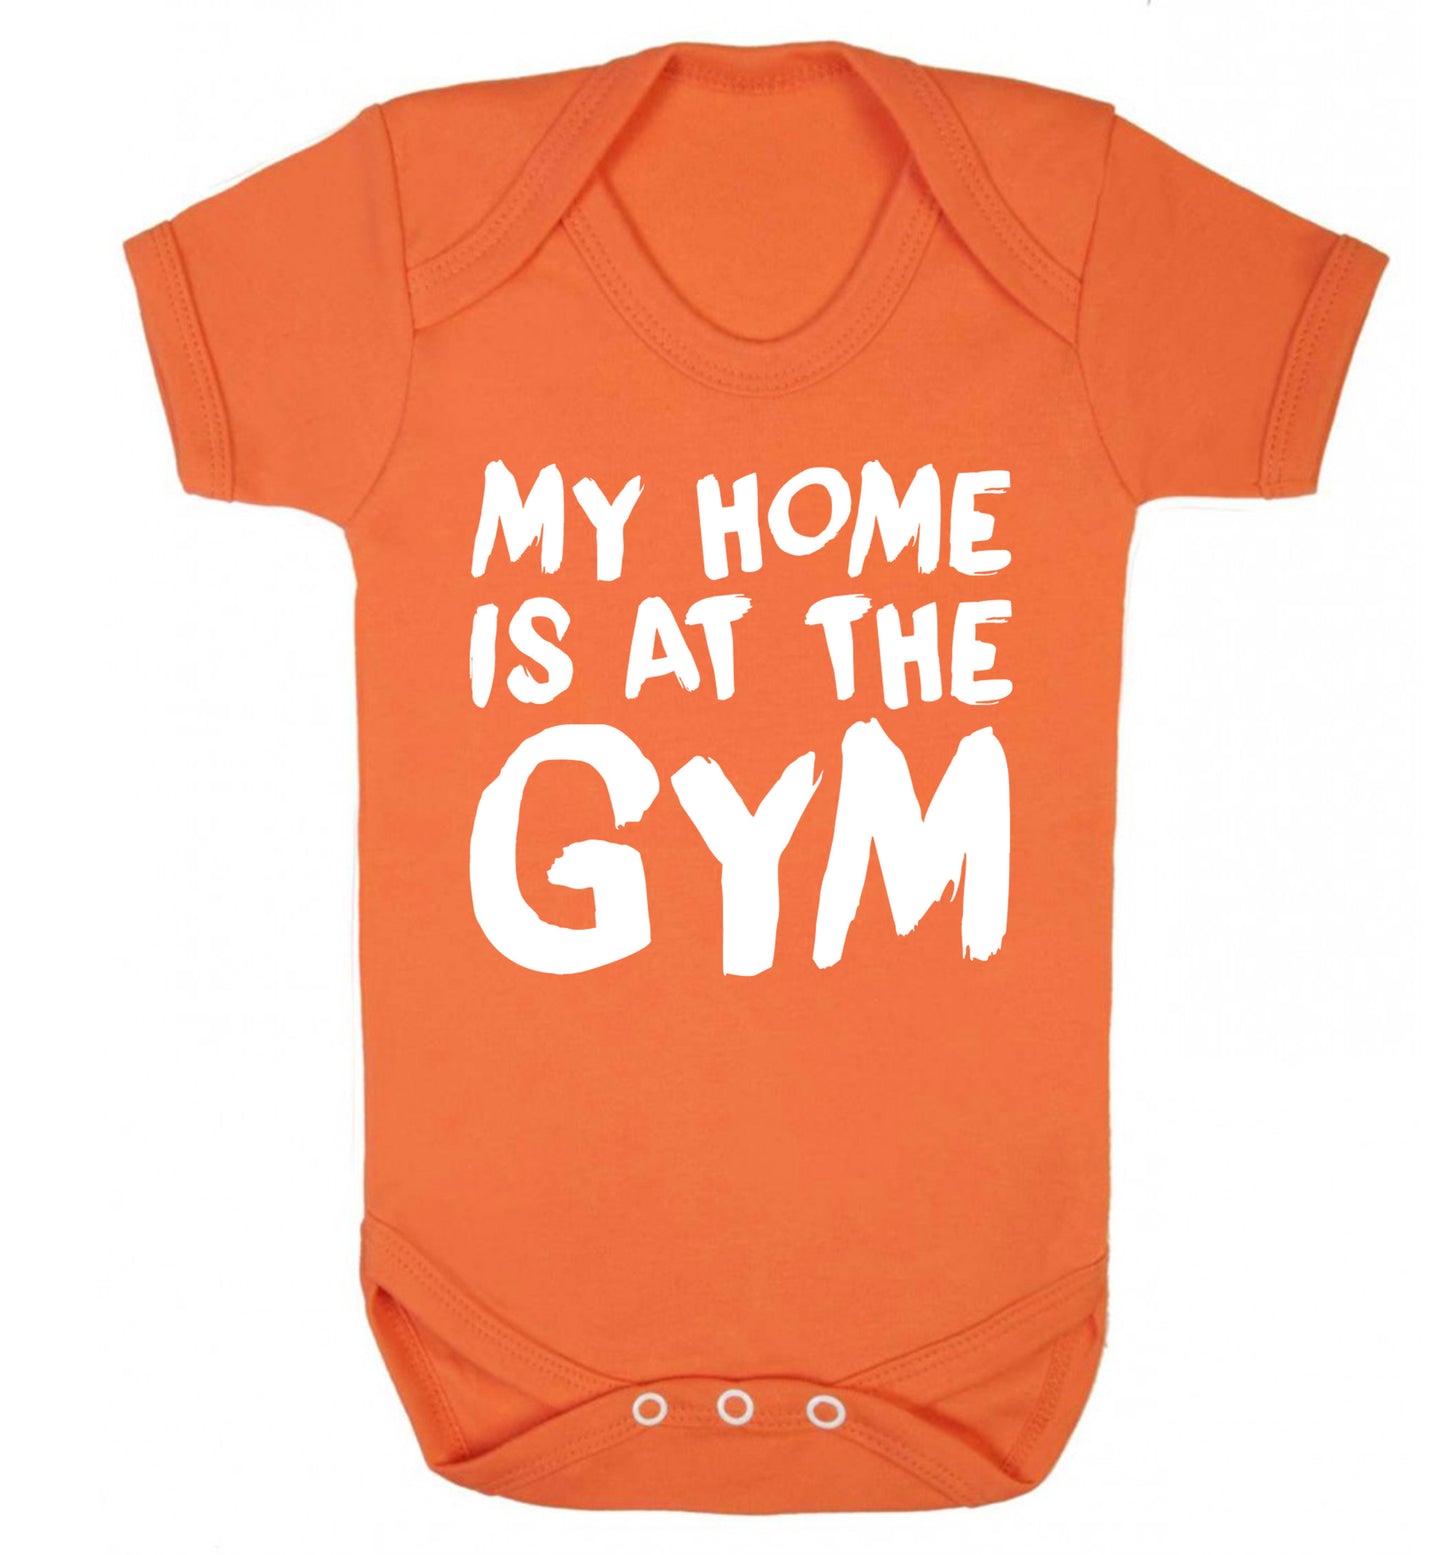 My home is at the gym Baby Vest orange 18-24 months